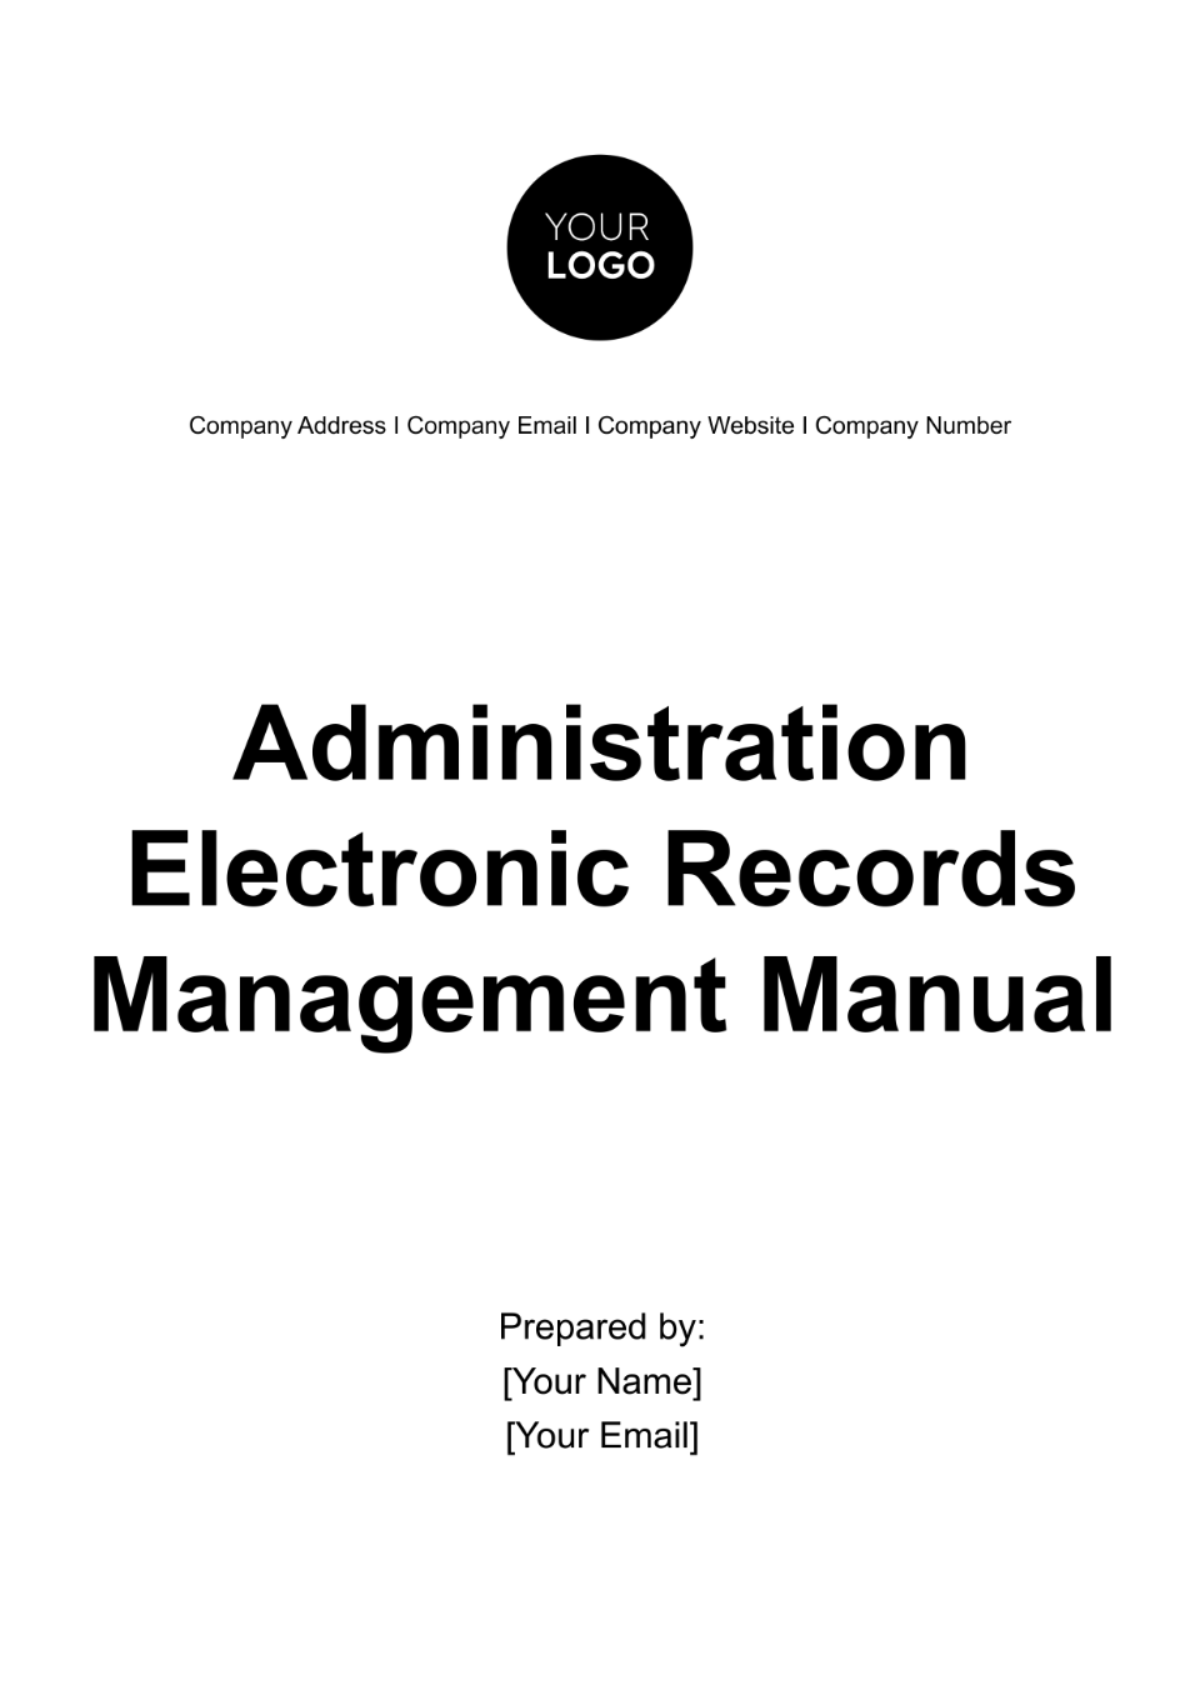 Administration Electronic Records Management Manual Template